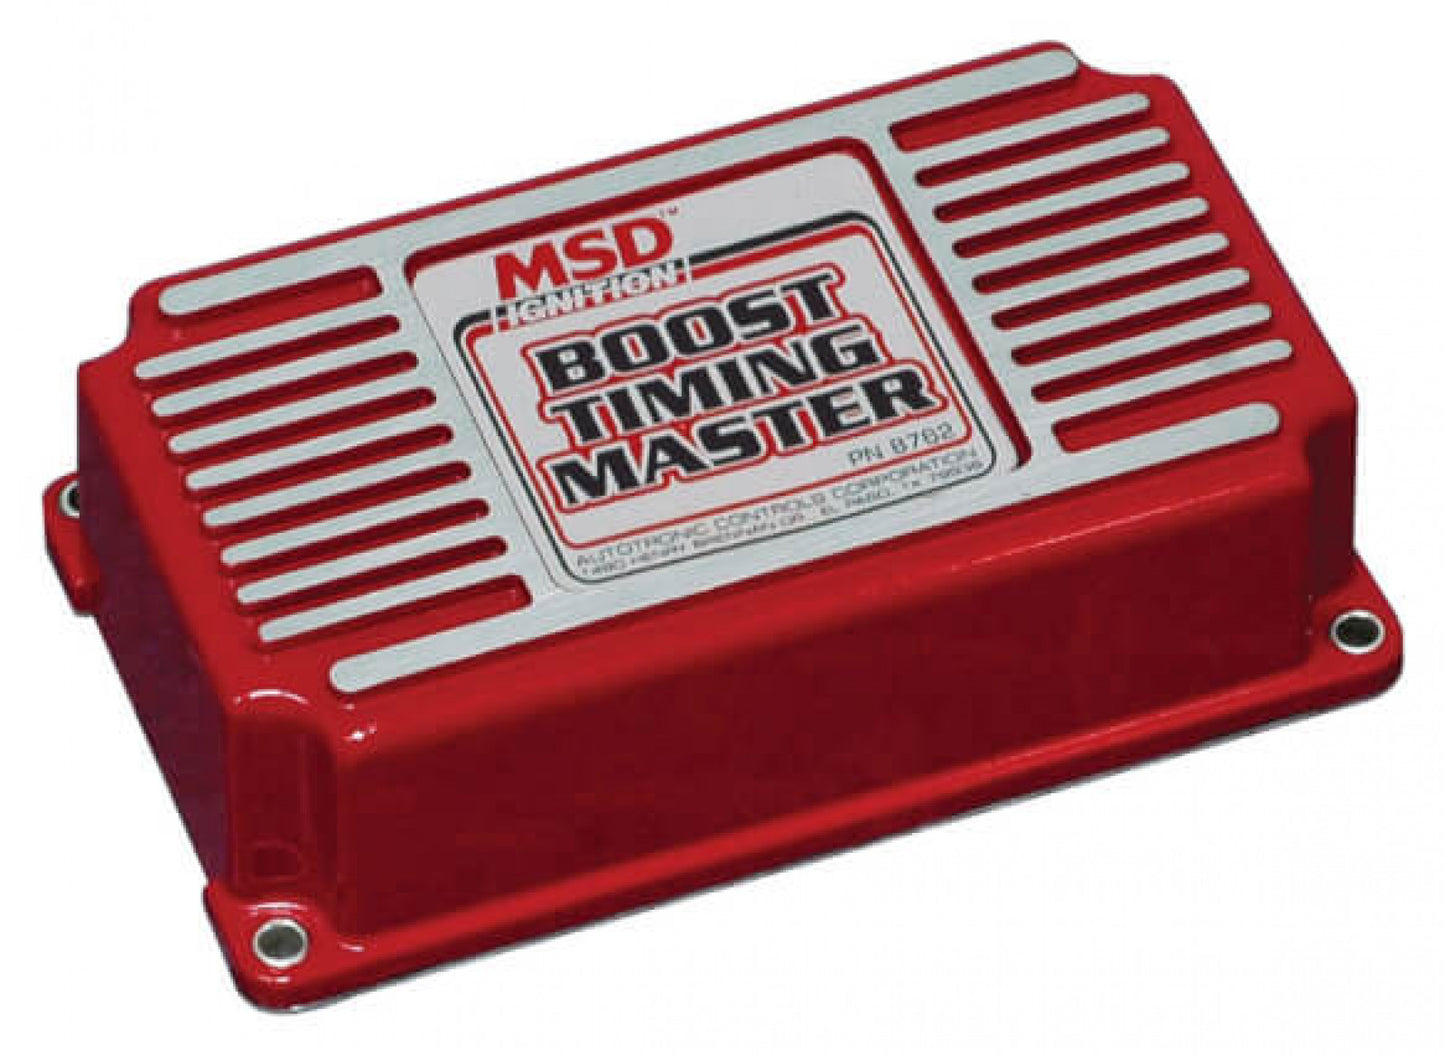 MSD Boost Timing Master for use with MSD Ignition Control '8762